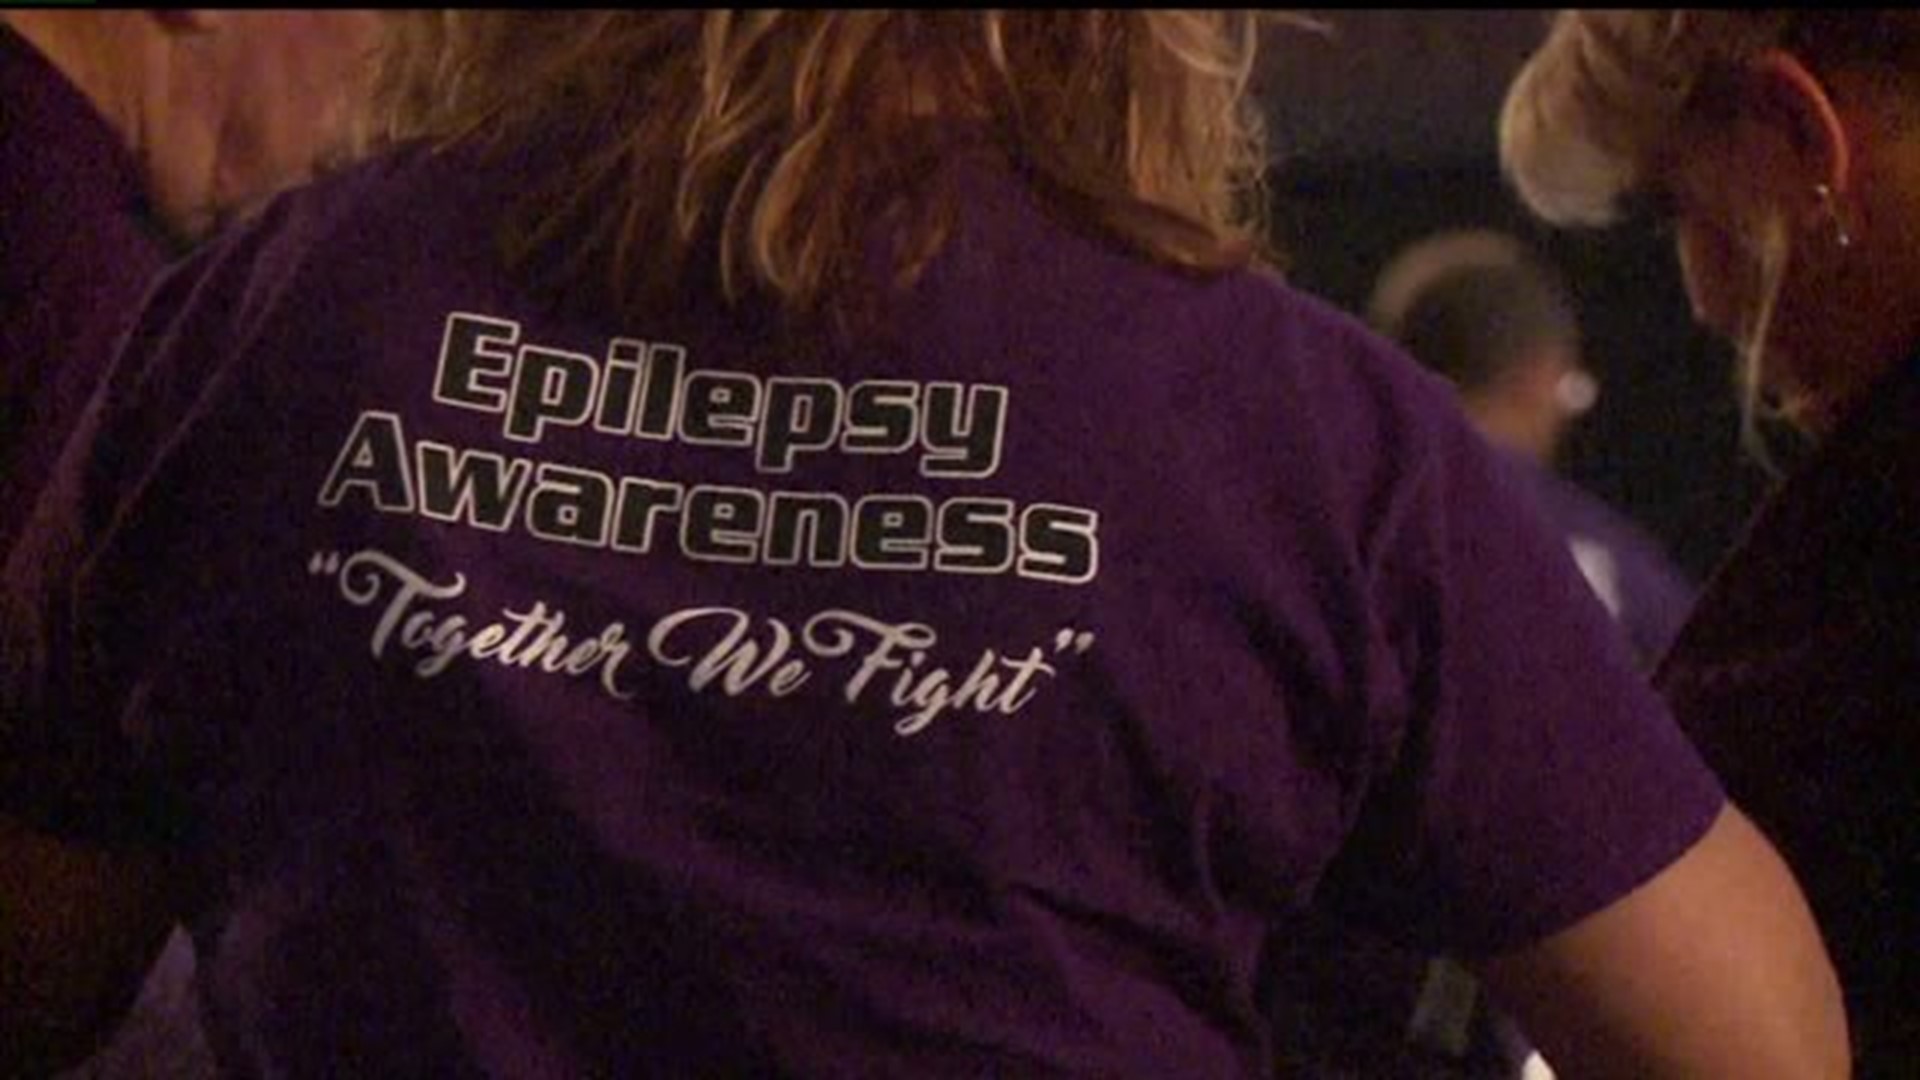 Epilepsy Awareness with Guys in Ties